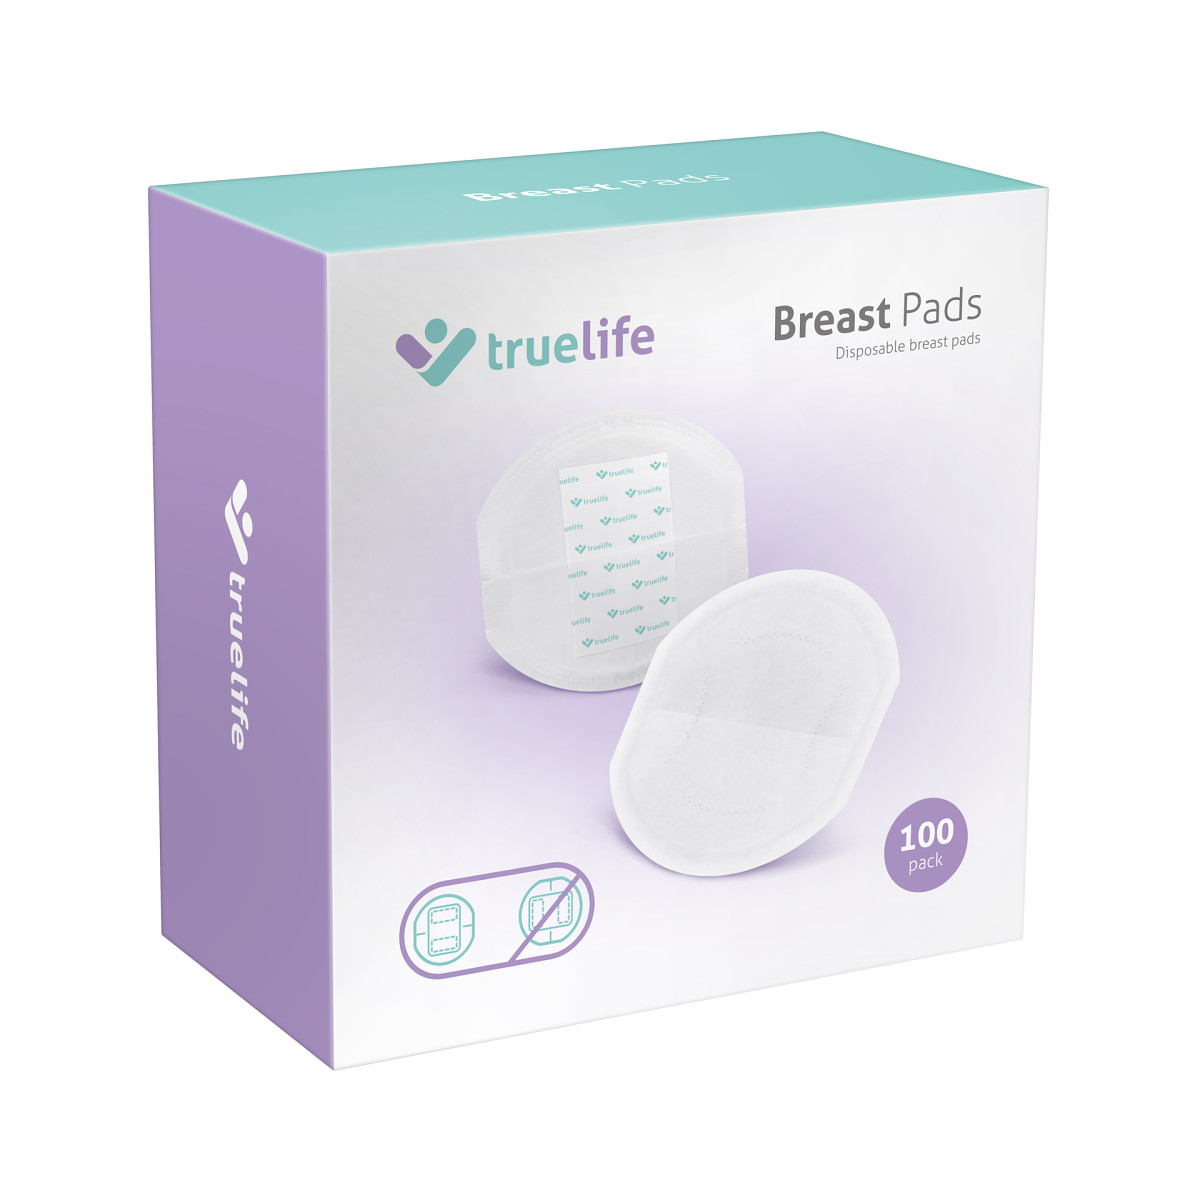 TrueLife Breast Pads – Komfort in jeder Situation